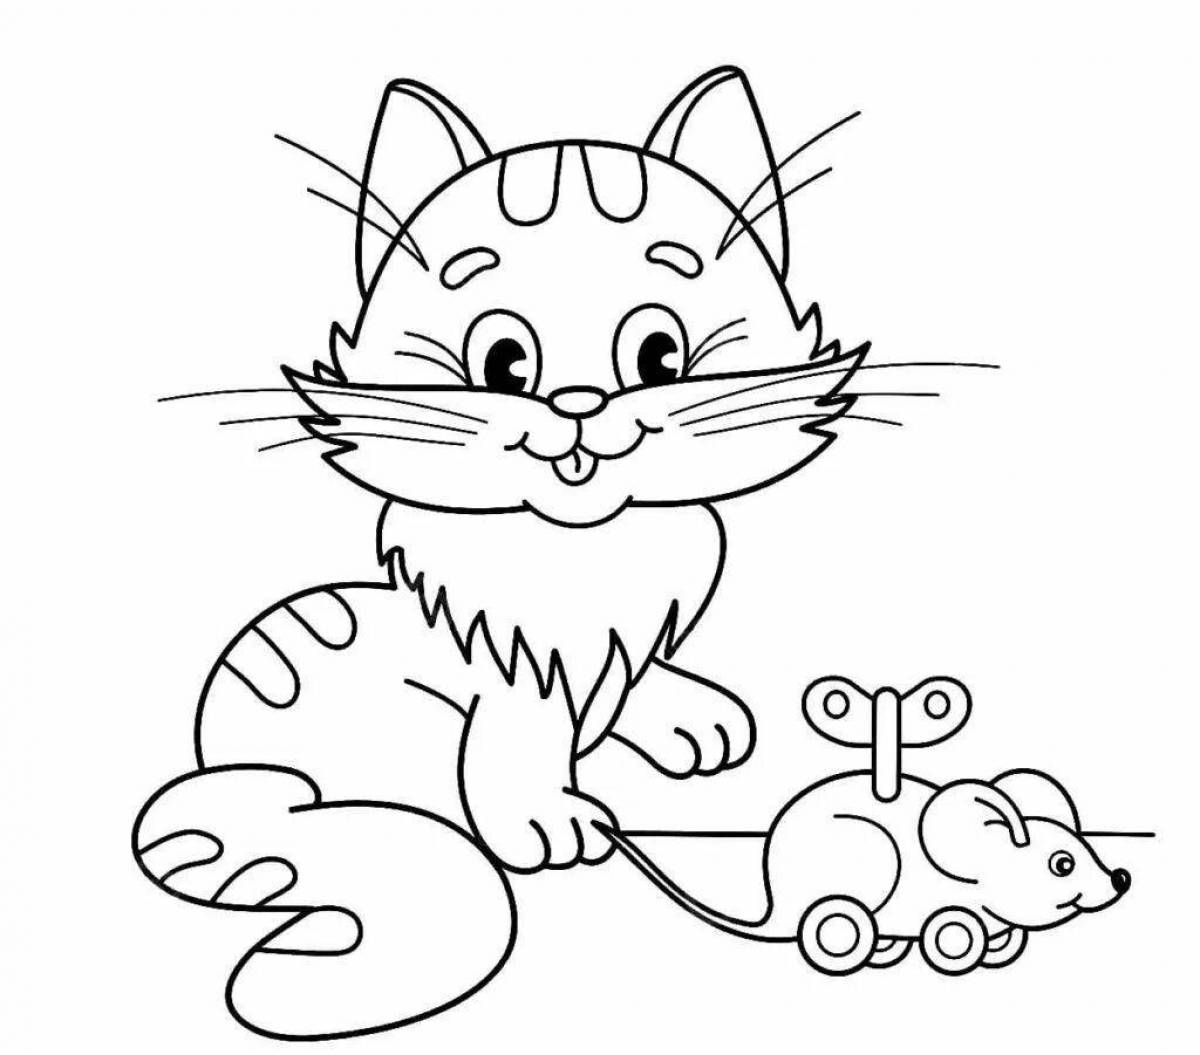 Bubble coloring cat for children 2-3 years old